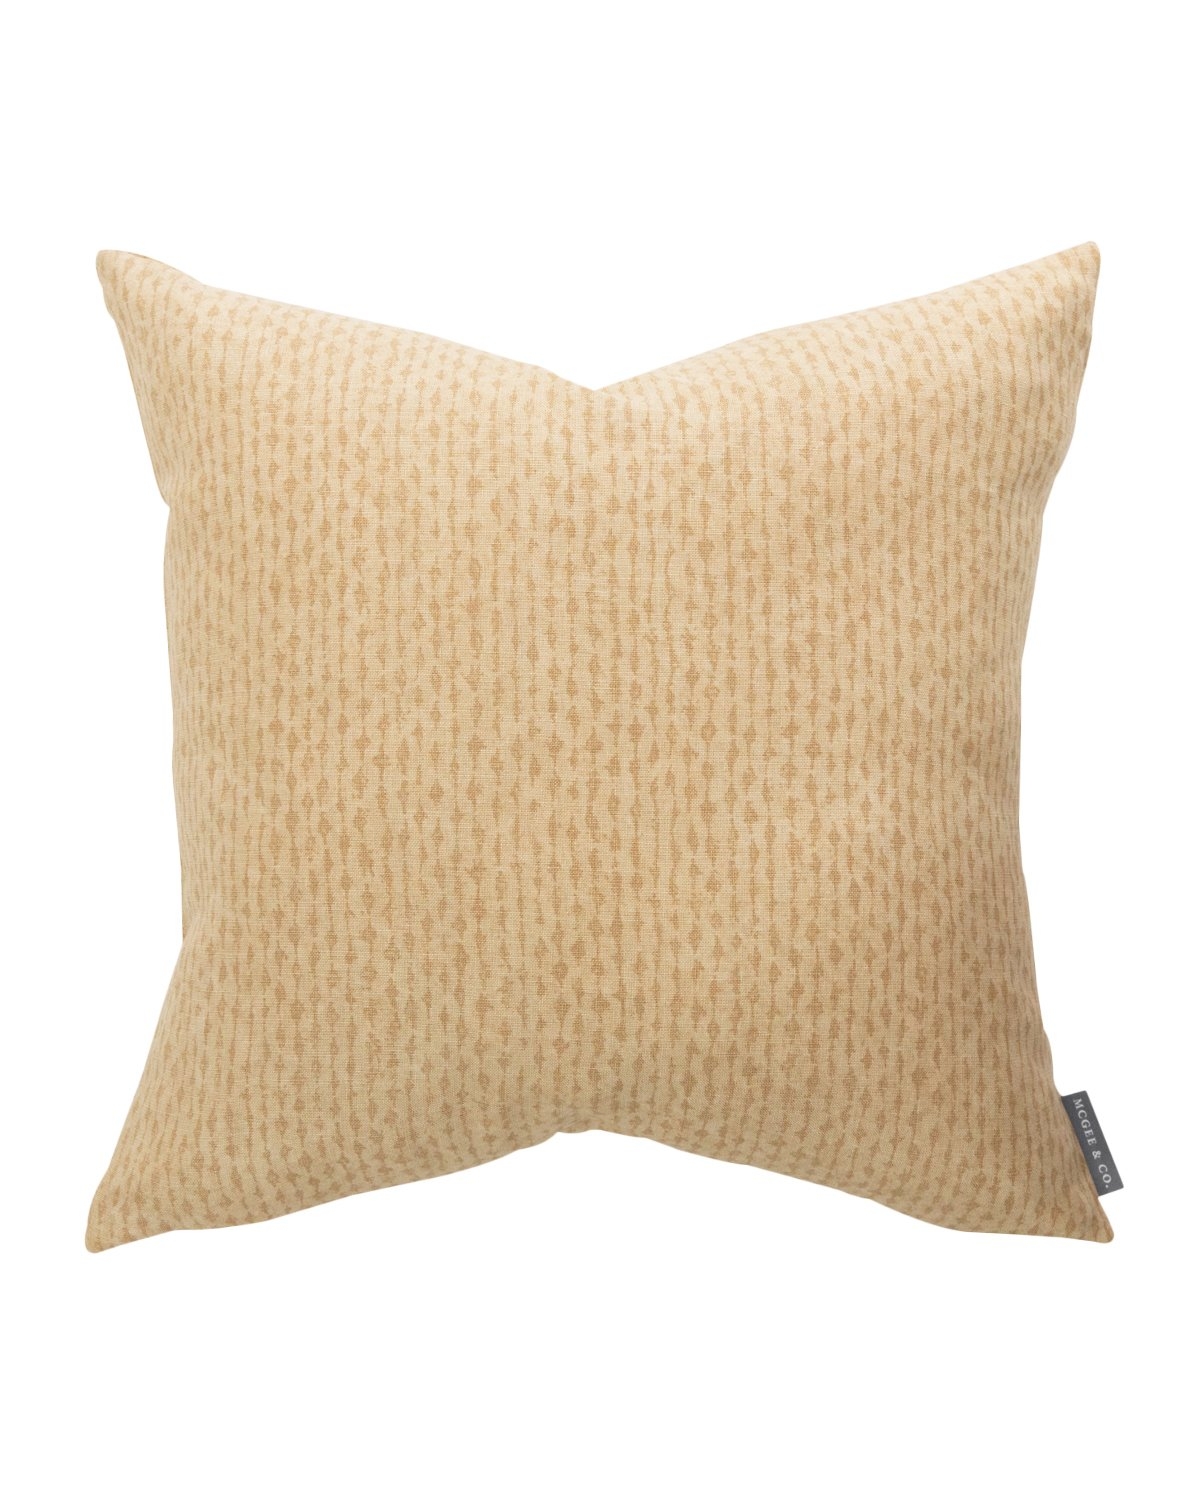 LOTTIE PILLOW WITHOUT INSERT, 20" x 20" - Image 0